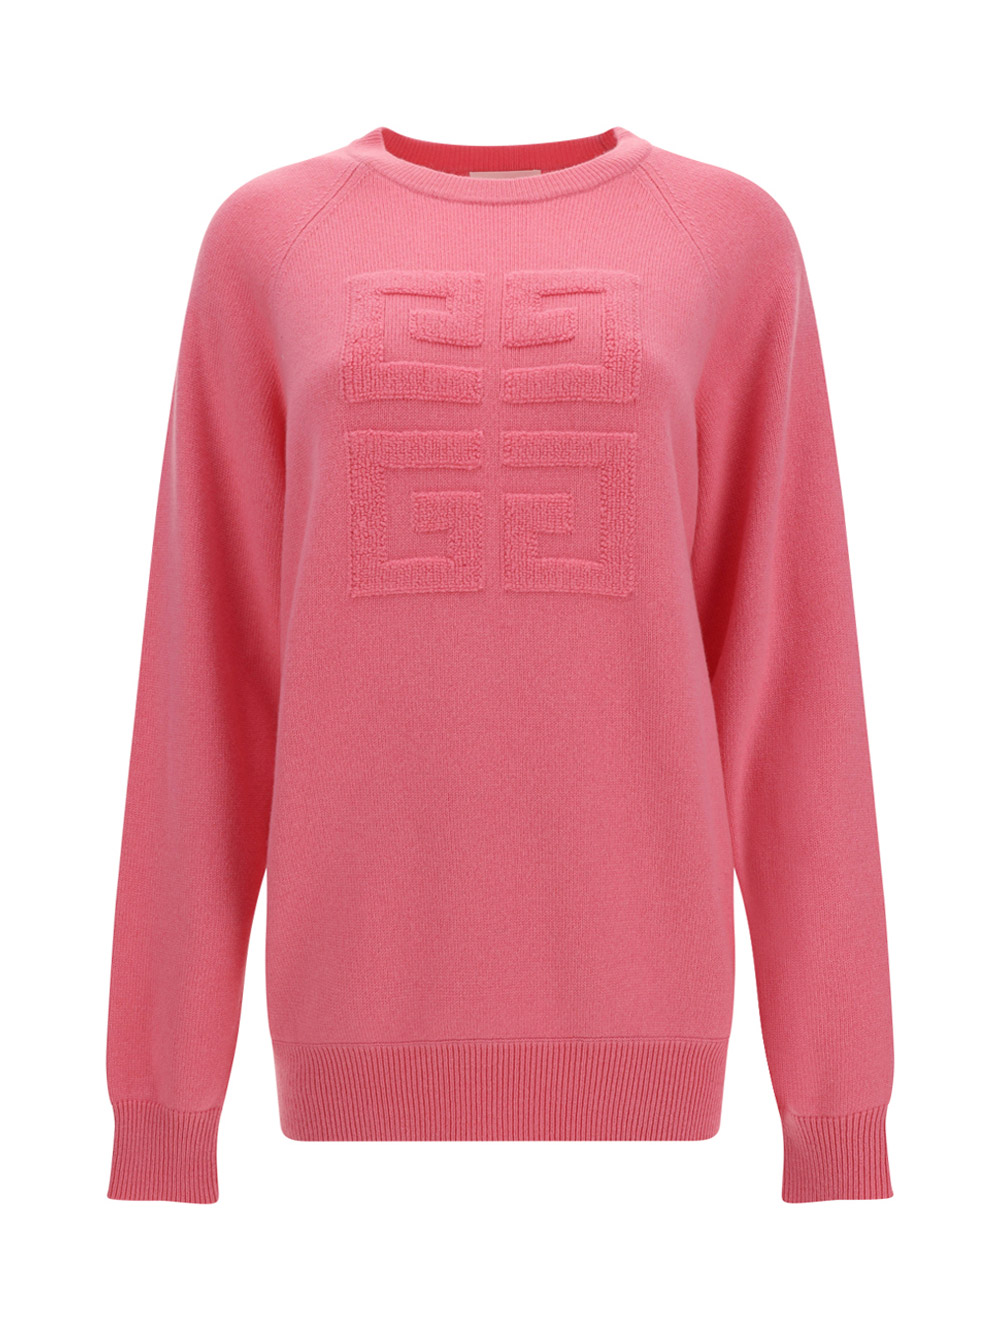 Givenchy Sweater In Bright Pink